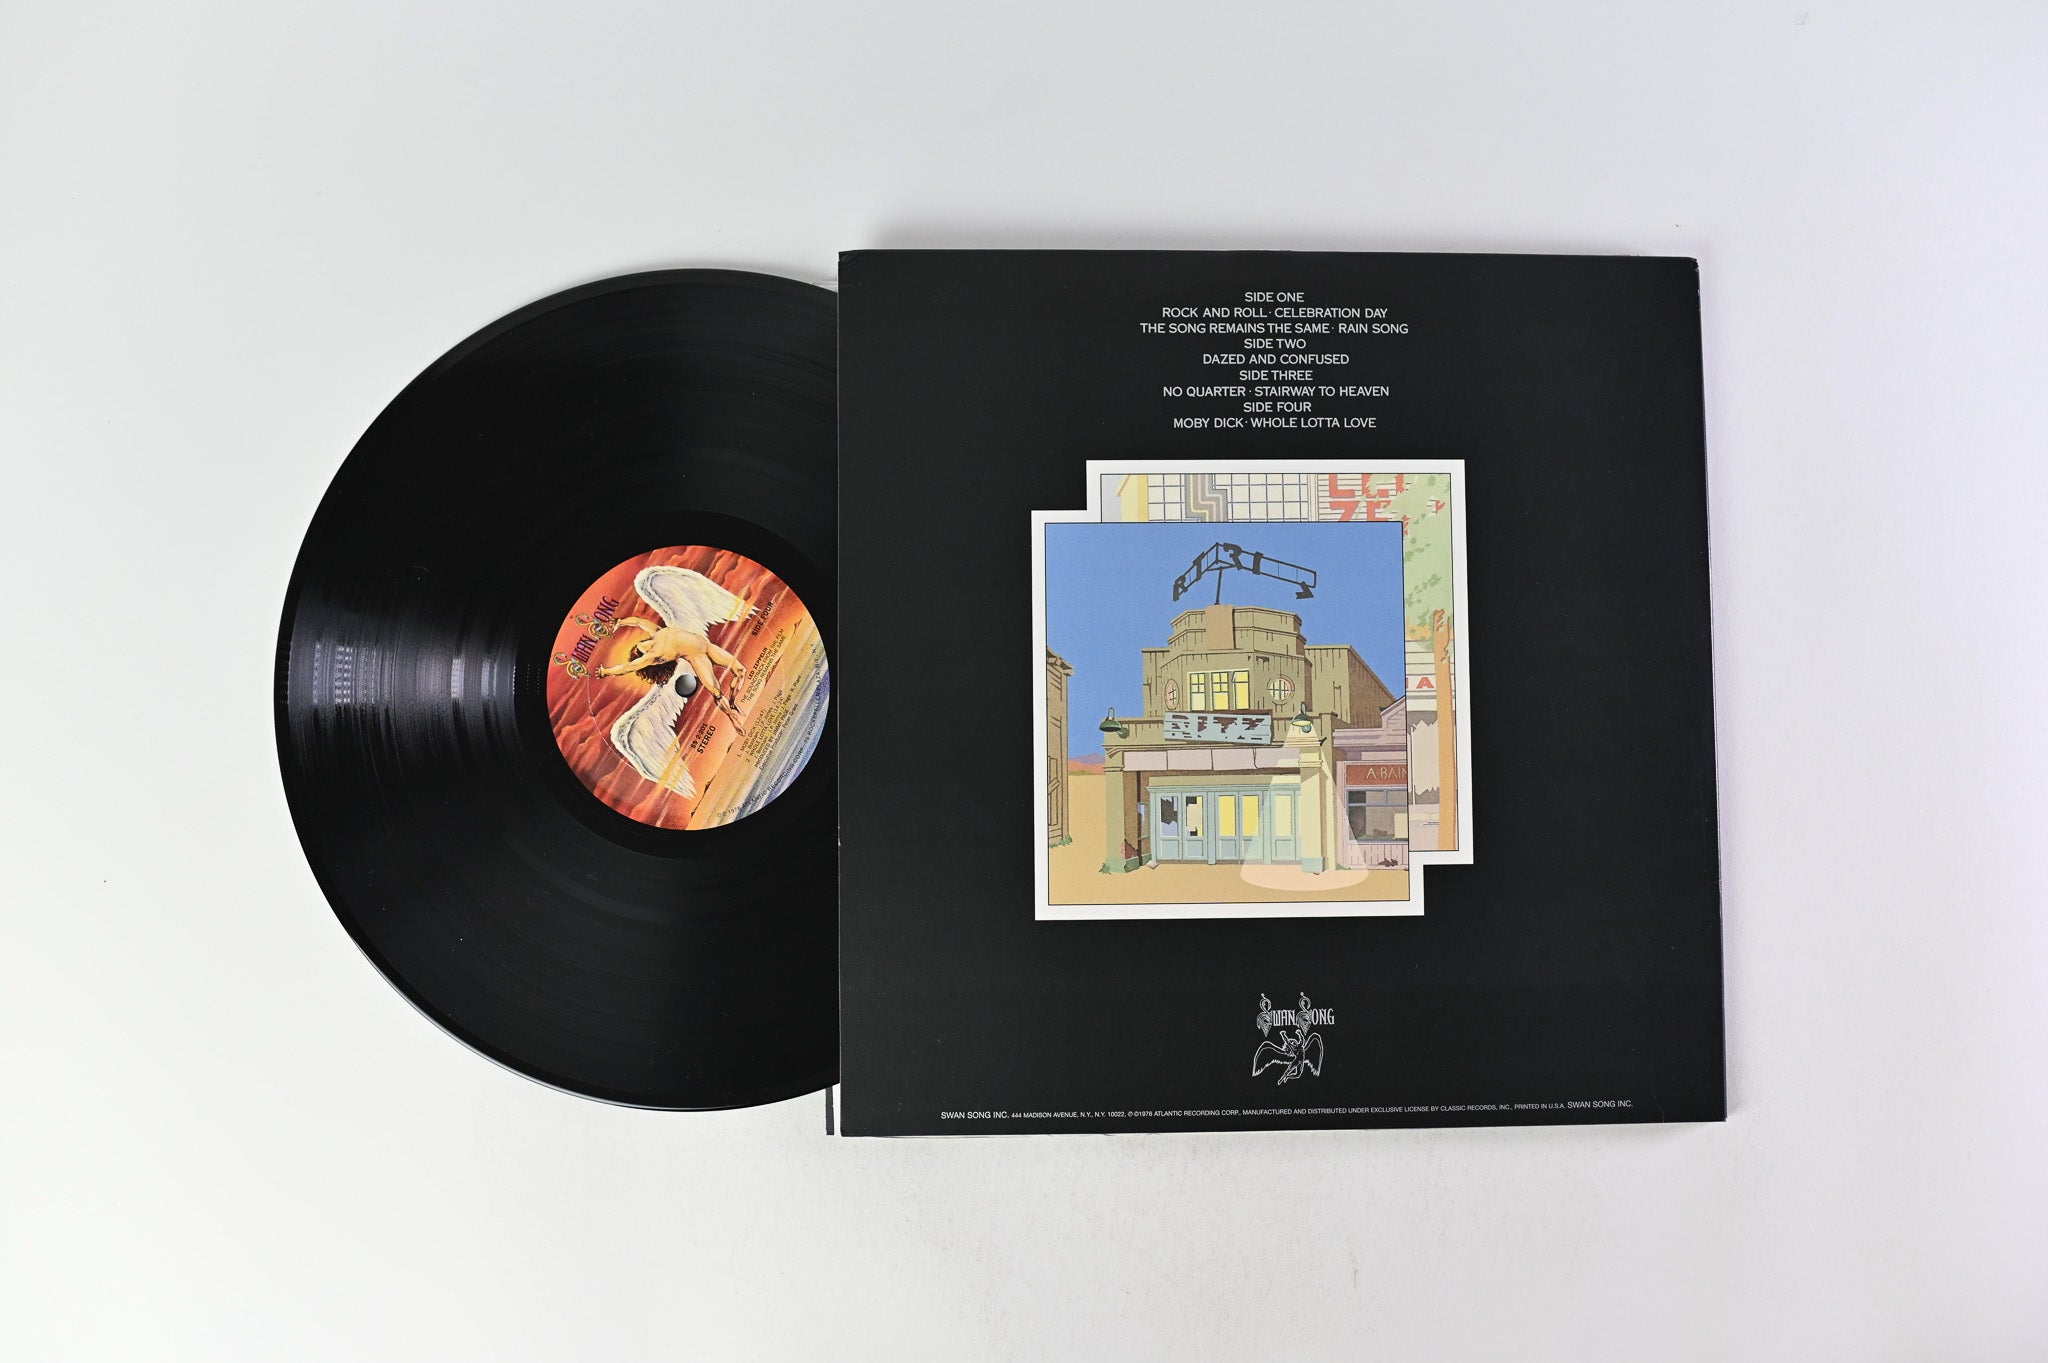 Led Zeppelin - The Soundtrack From The Film The Song Remains The Same on Classic Records